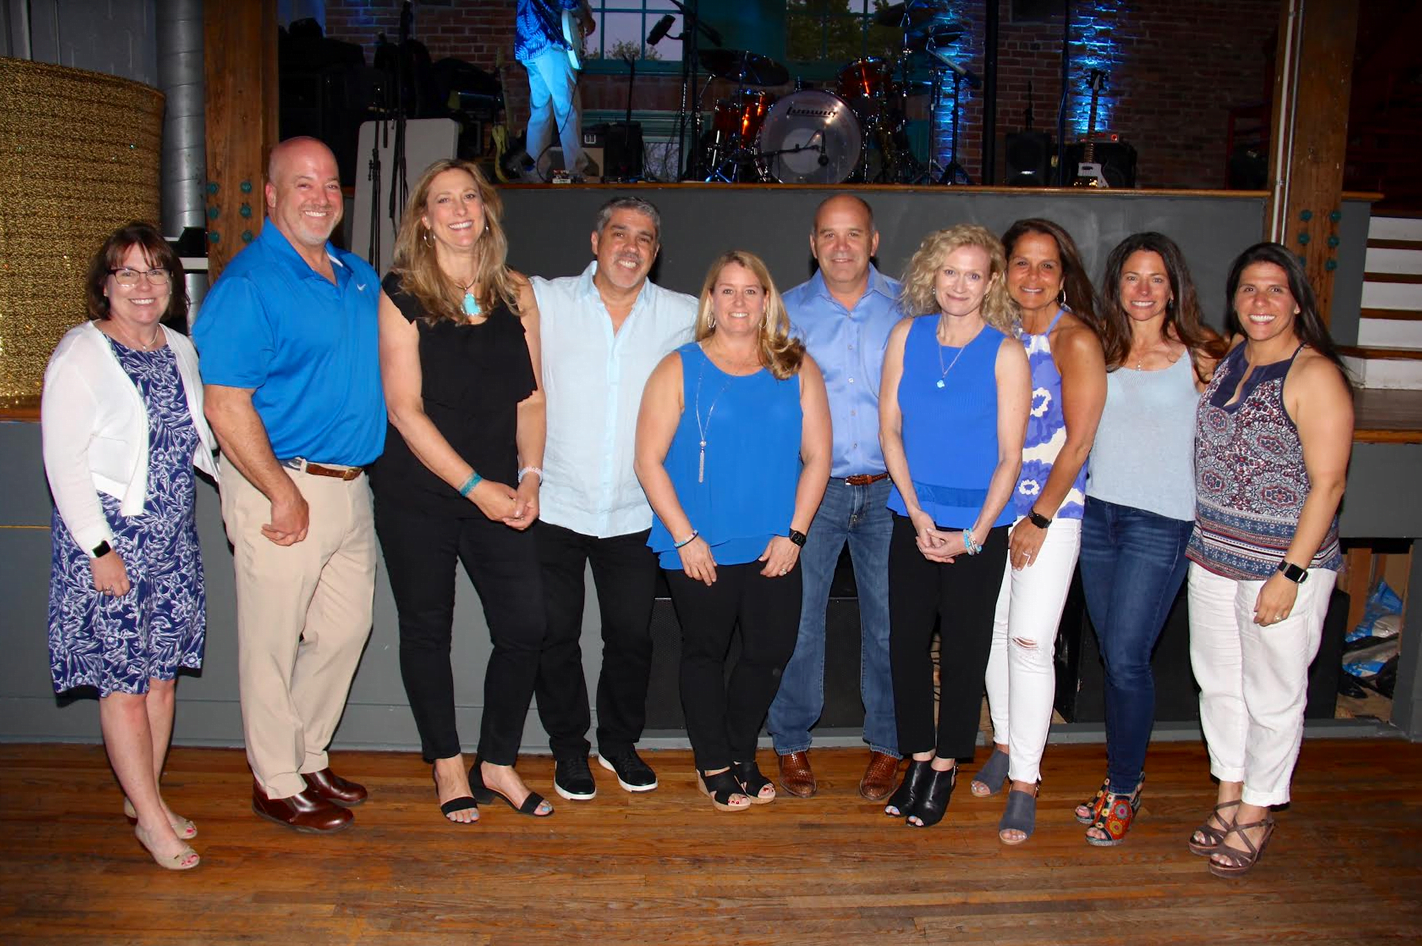 ECFF Board members from last year’s event, from L to R: Susan Warner, Timothy Kane, Mary and Gary Dell’Abate, trustees Pam and Joe Fedorko, Beth Allen Moore, M.D., Angela Swift, Robin Bartholomew and Christine Franklin (missing Maria Fata).